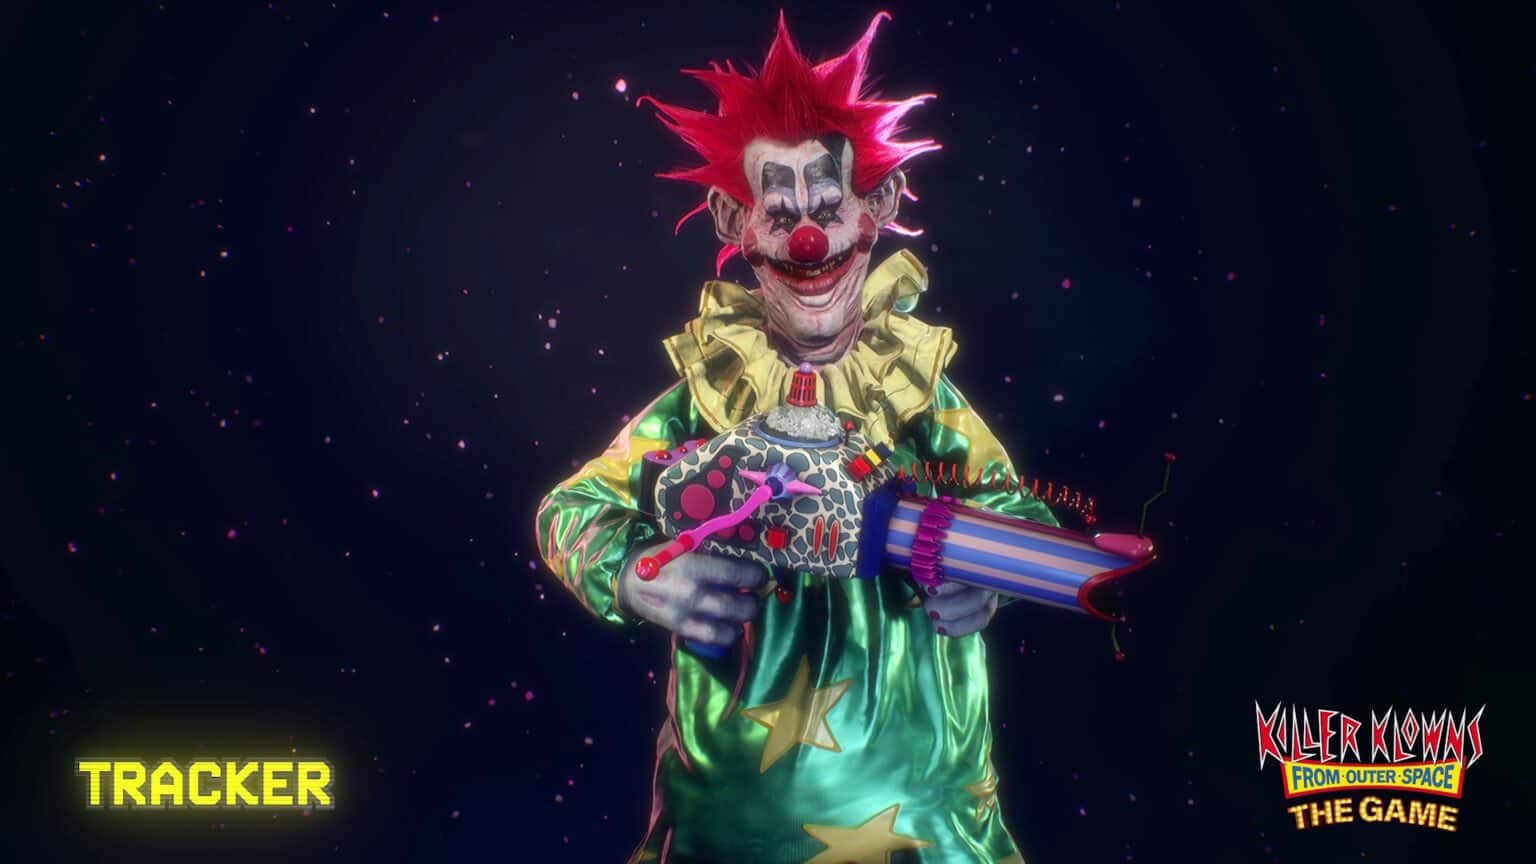 Killer Klowns from Outer Space game